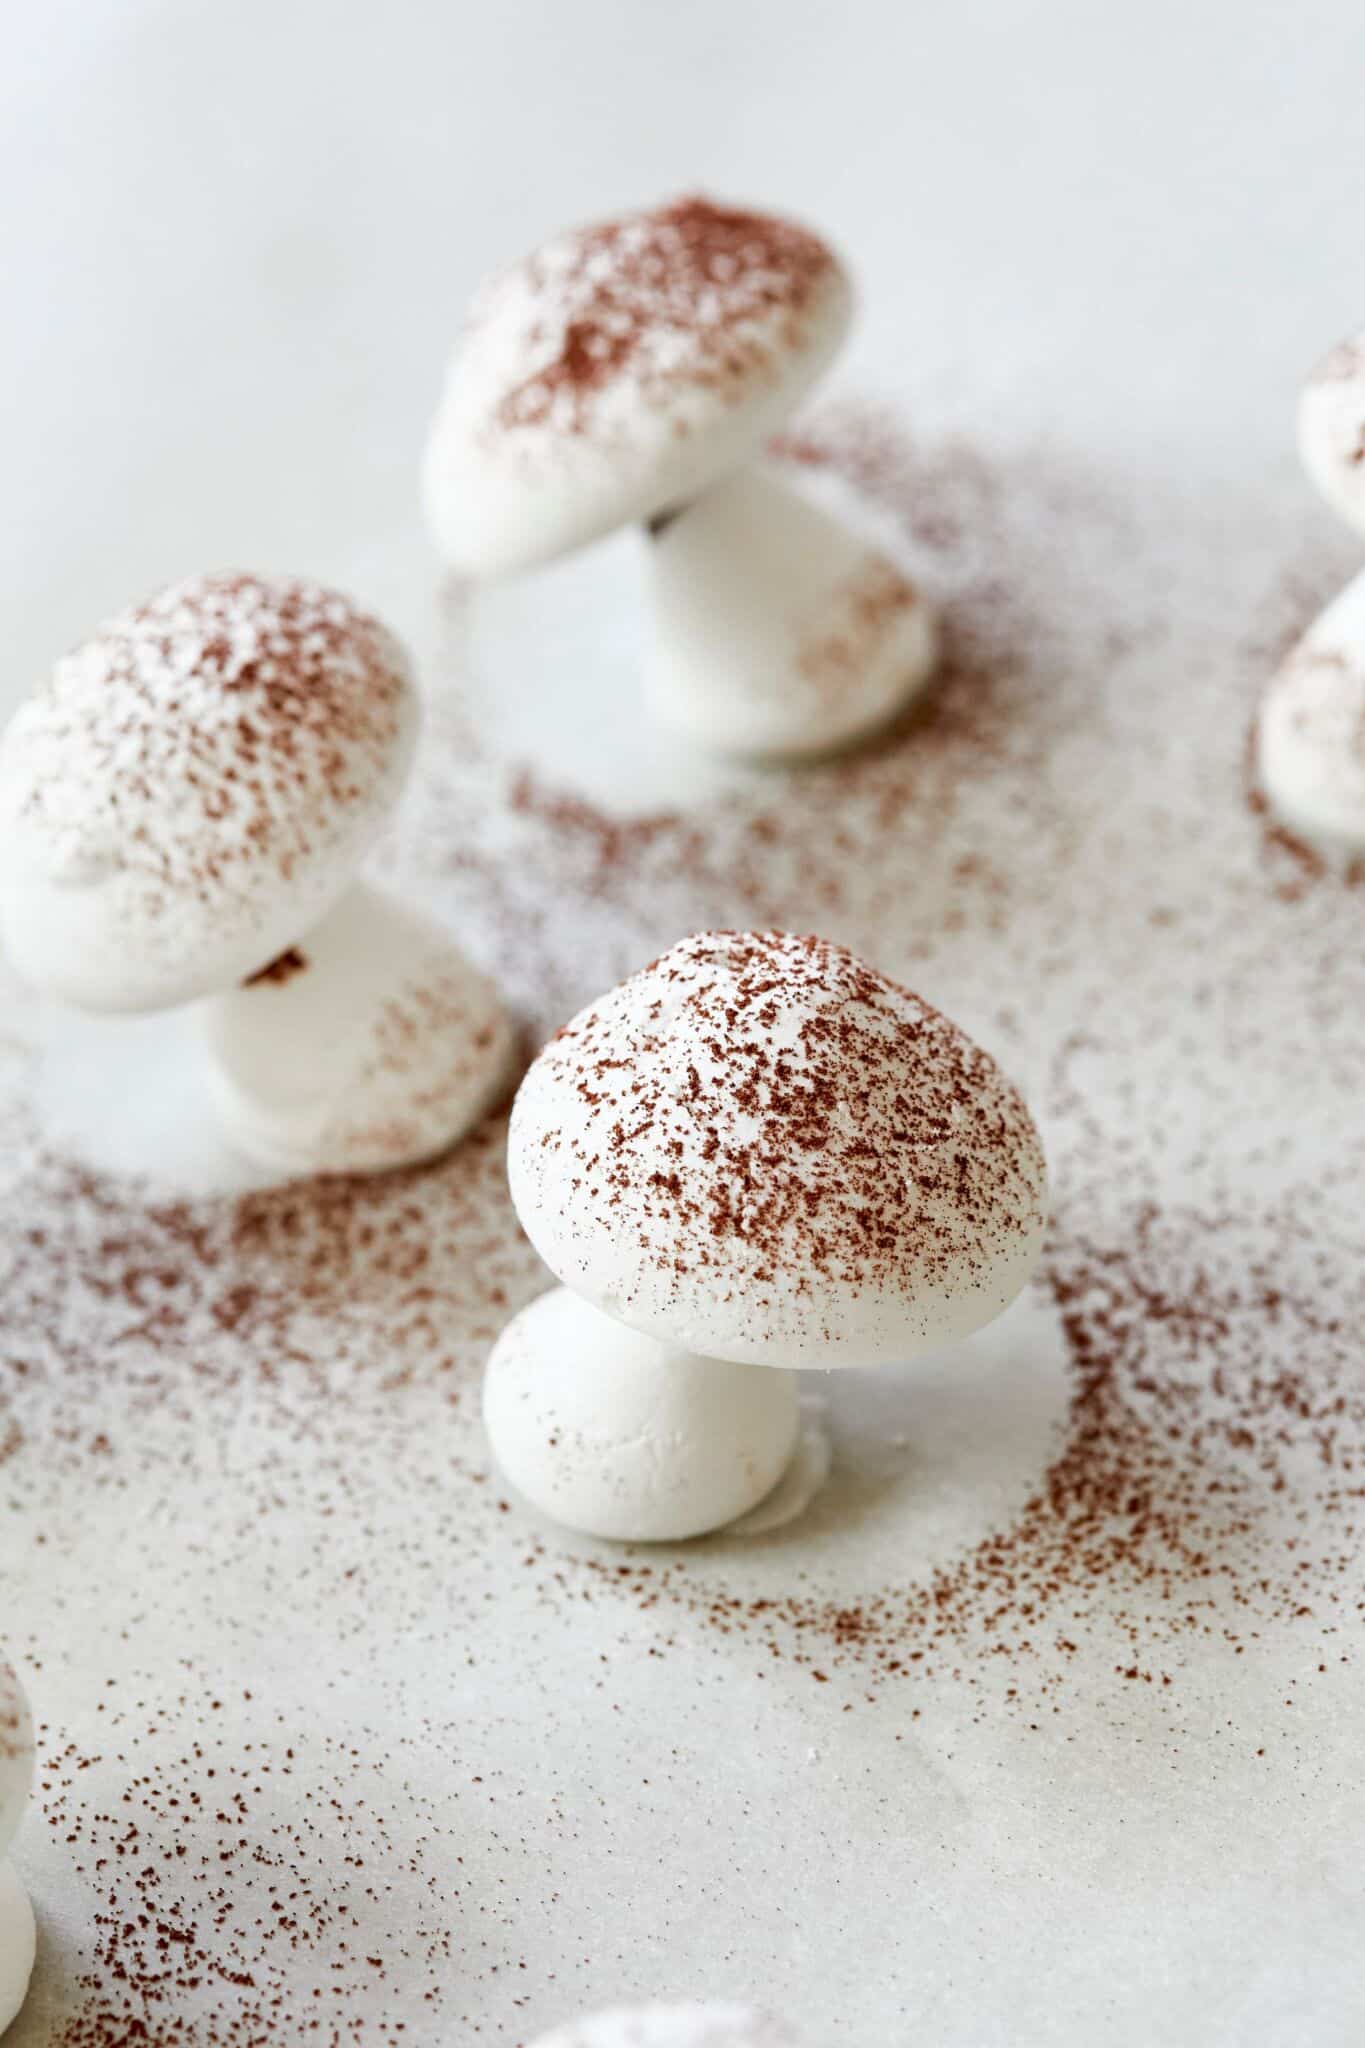 White Meringue Mushroom cookies are dusted with chocolate-color cocoa powder, ready for Bûche de Noël.